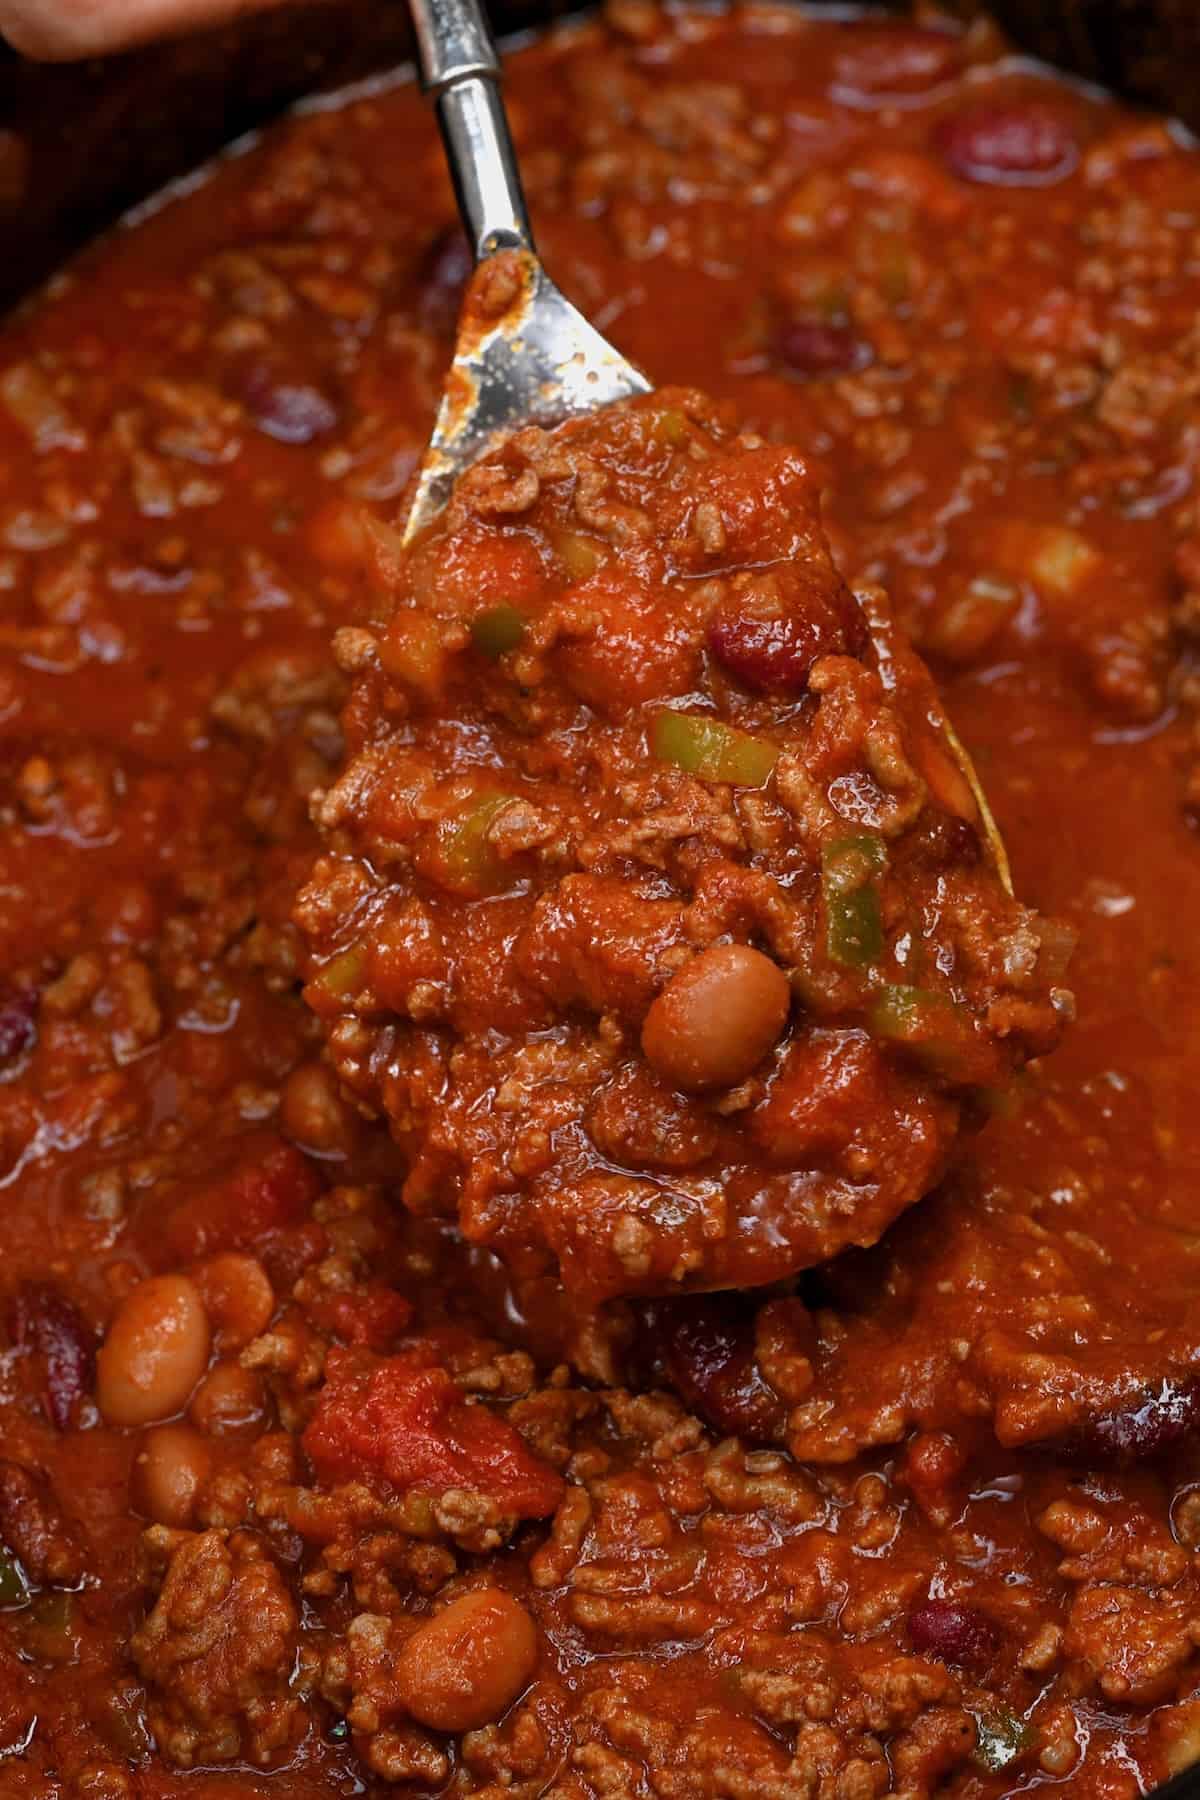 A spoonful of Wendy's chili